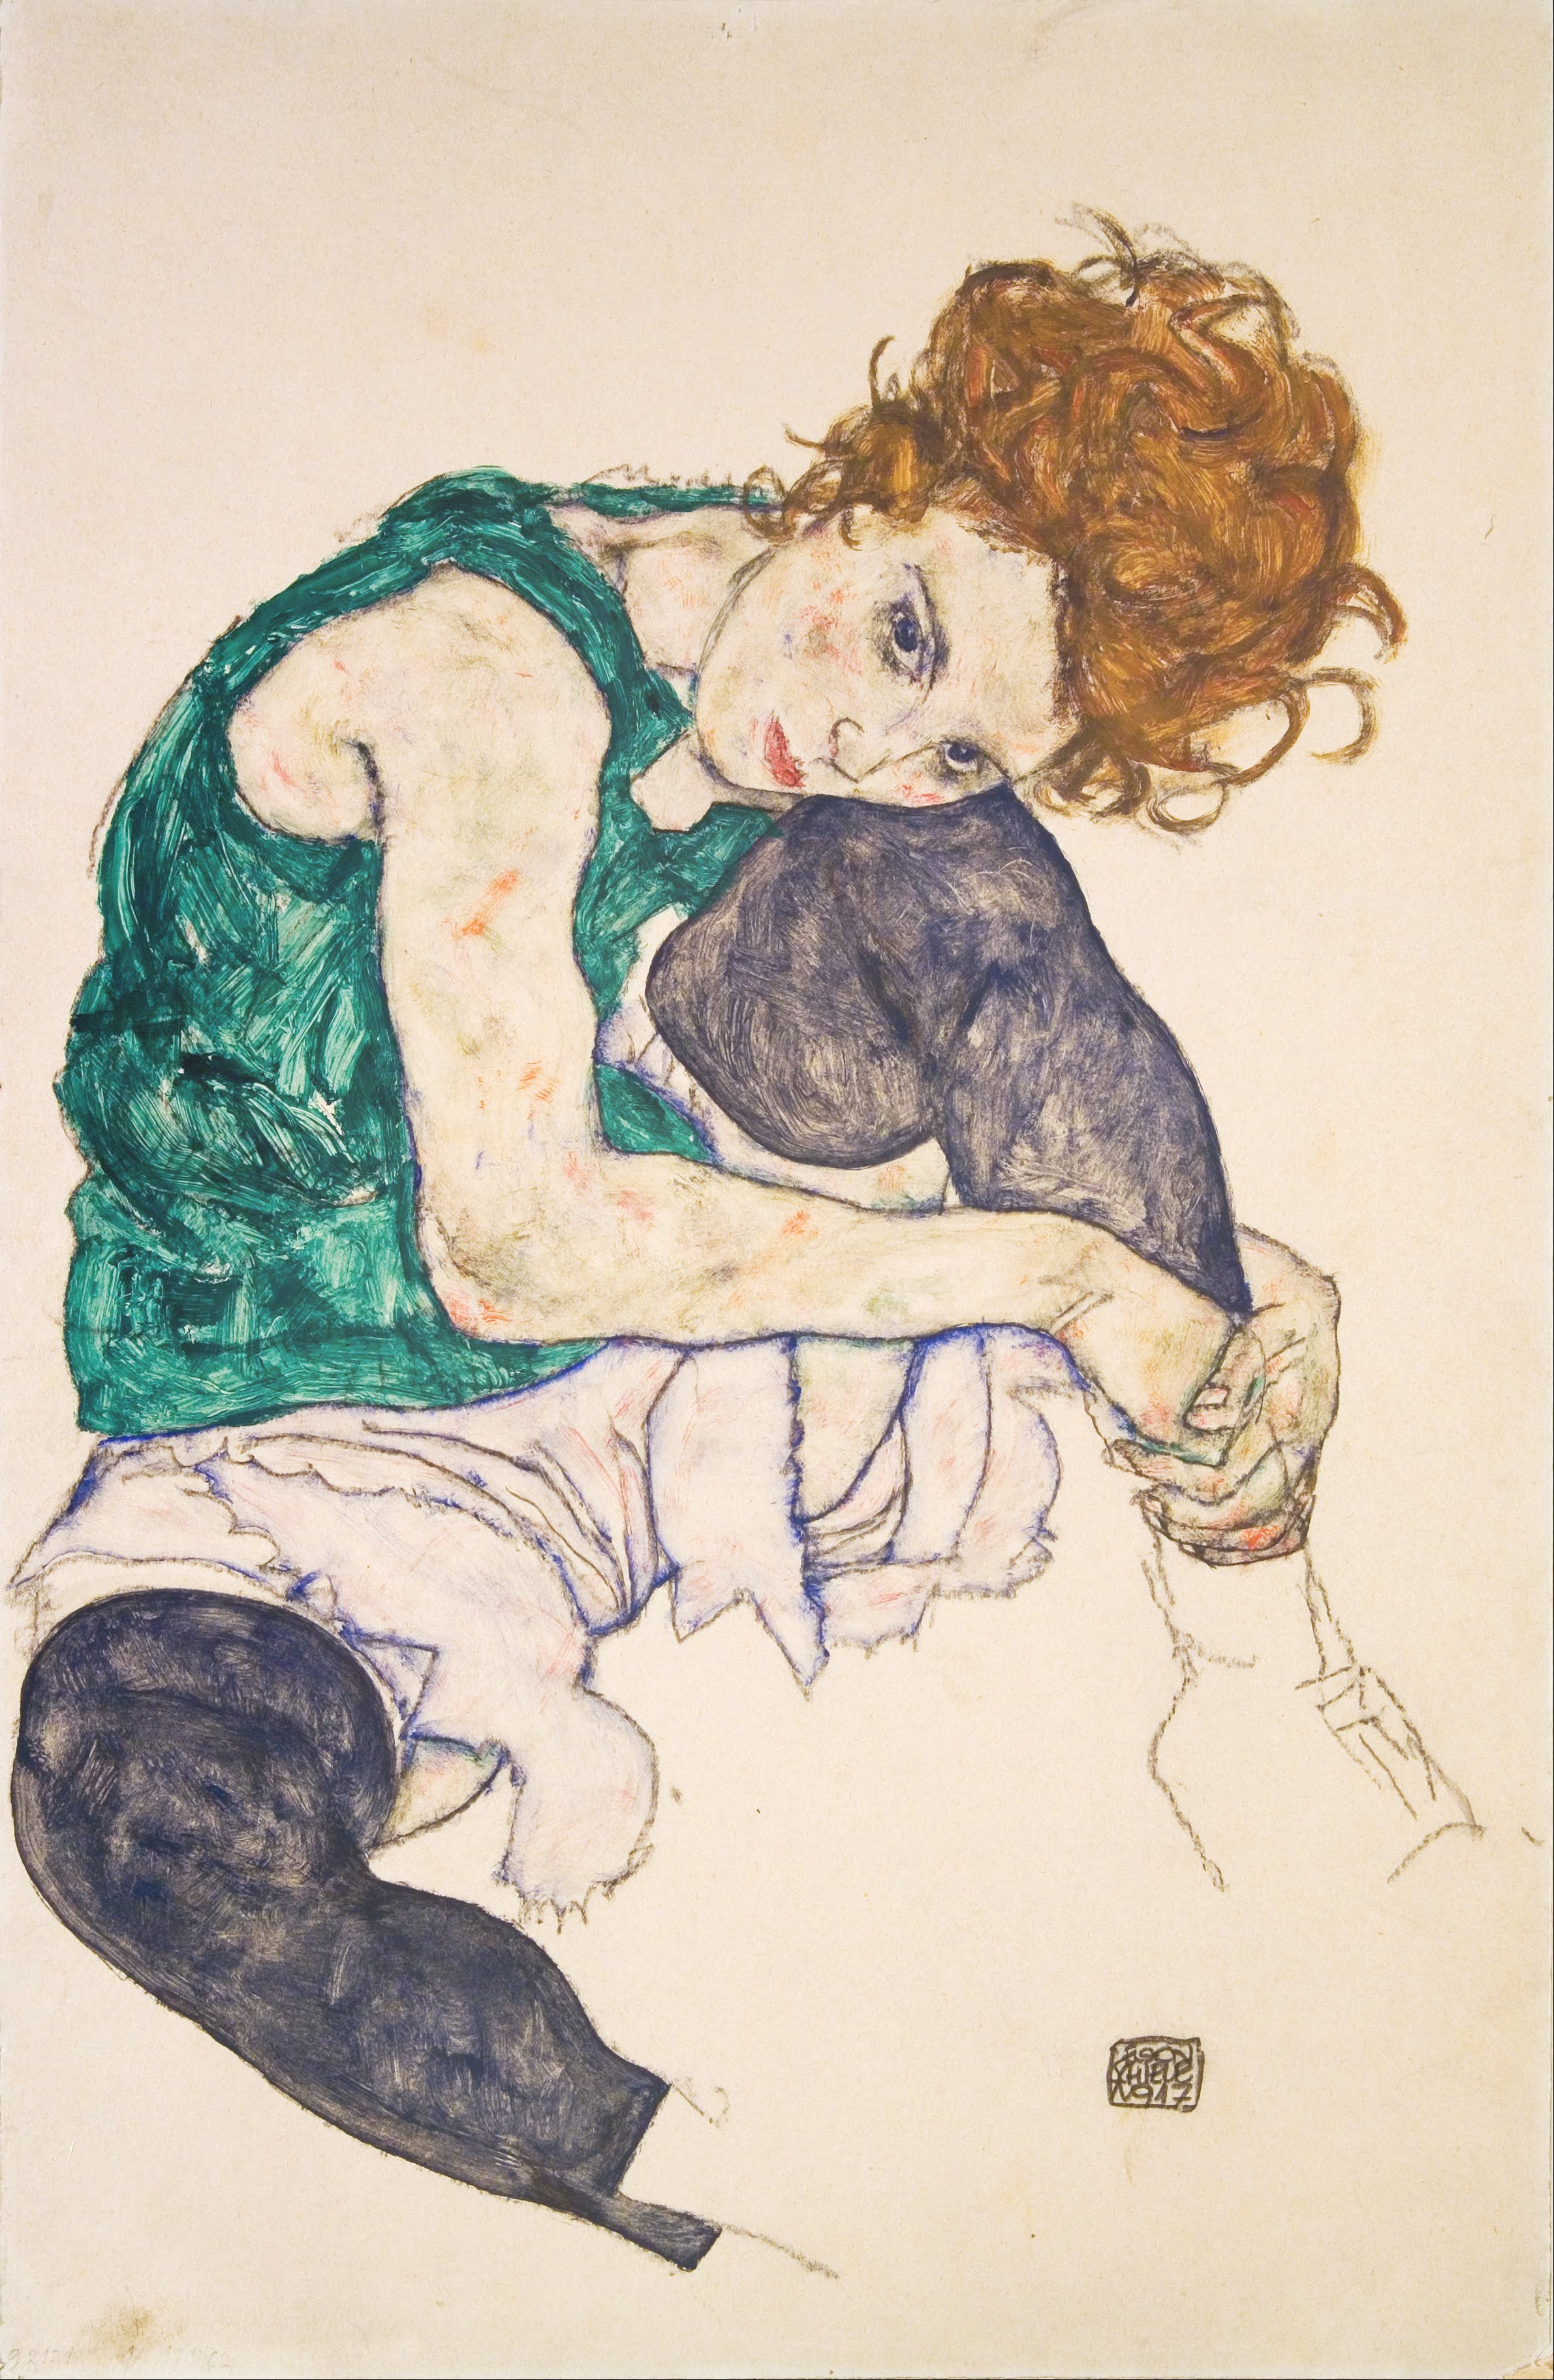 The Seated Woman With Bent Knees by Egon Schiele - 1917 - 46 x 30.5 cm National Gallery in Prague